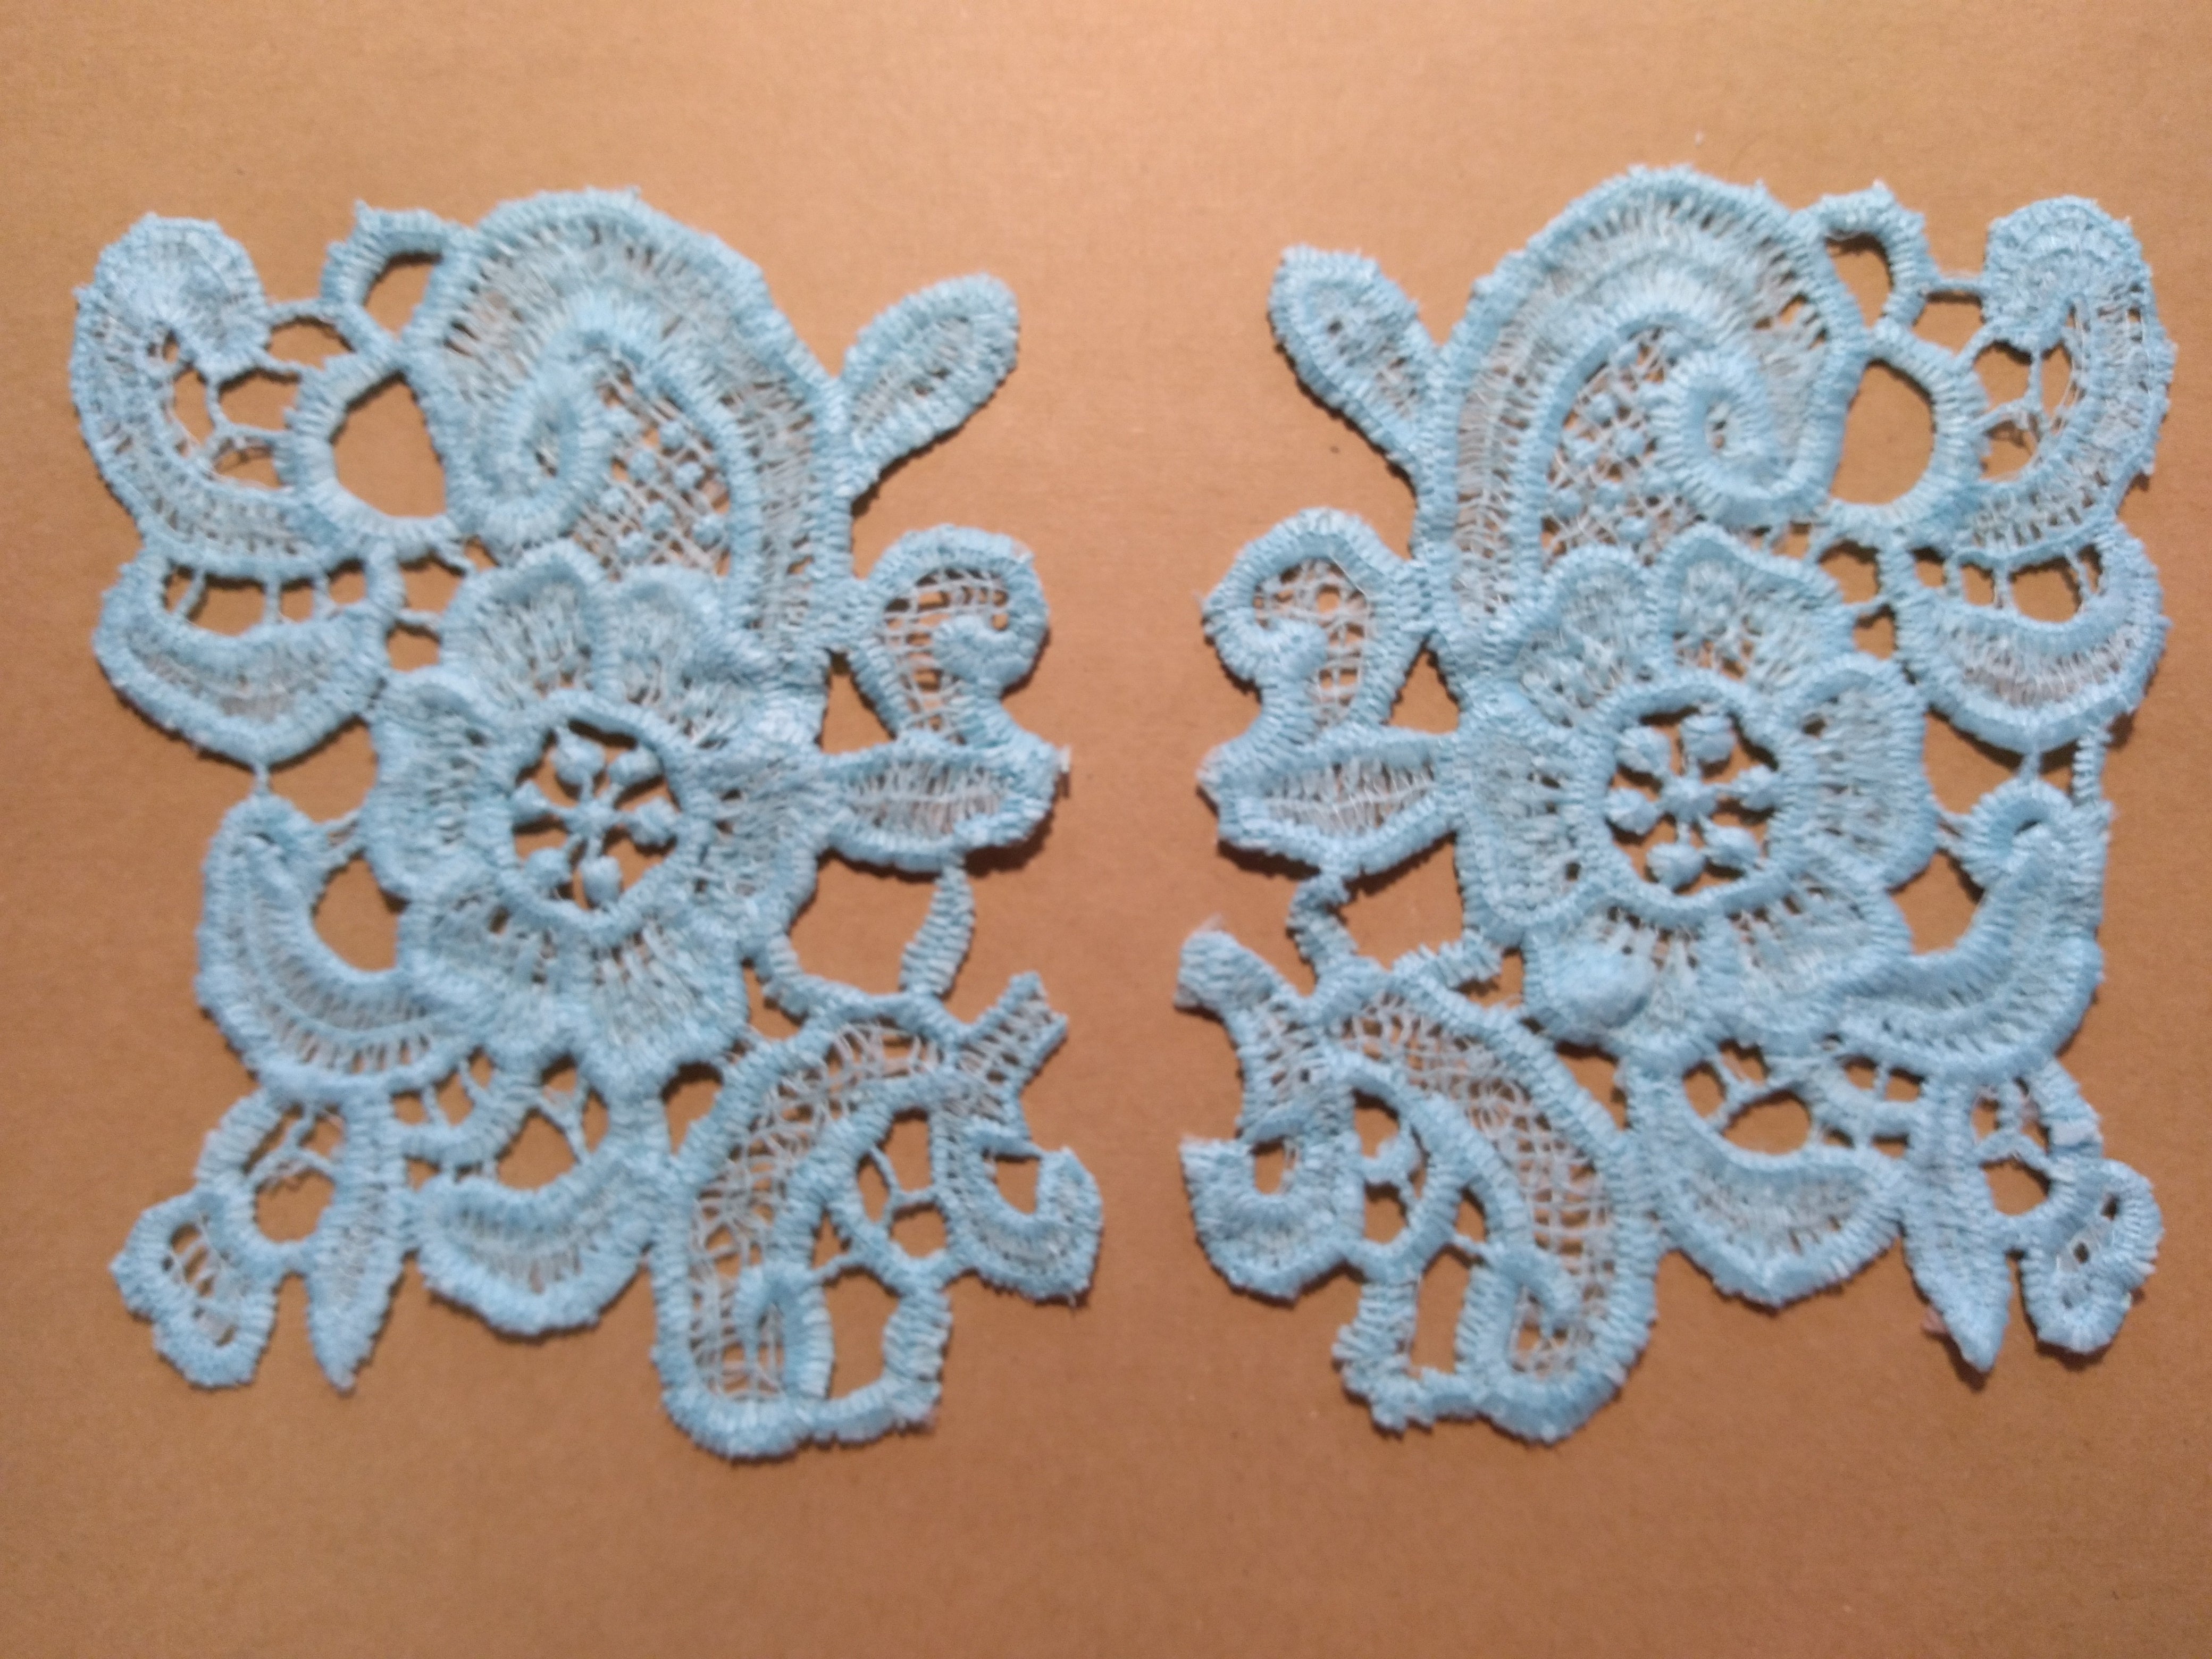 2-Piece Lace Applique in Teal-8